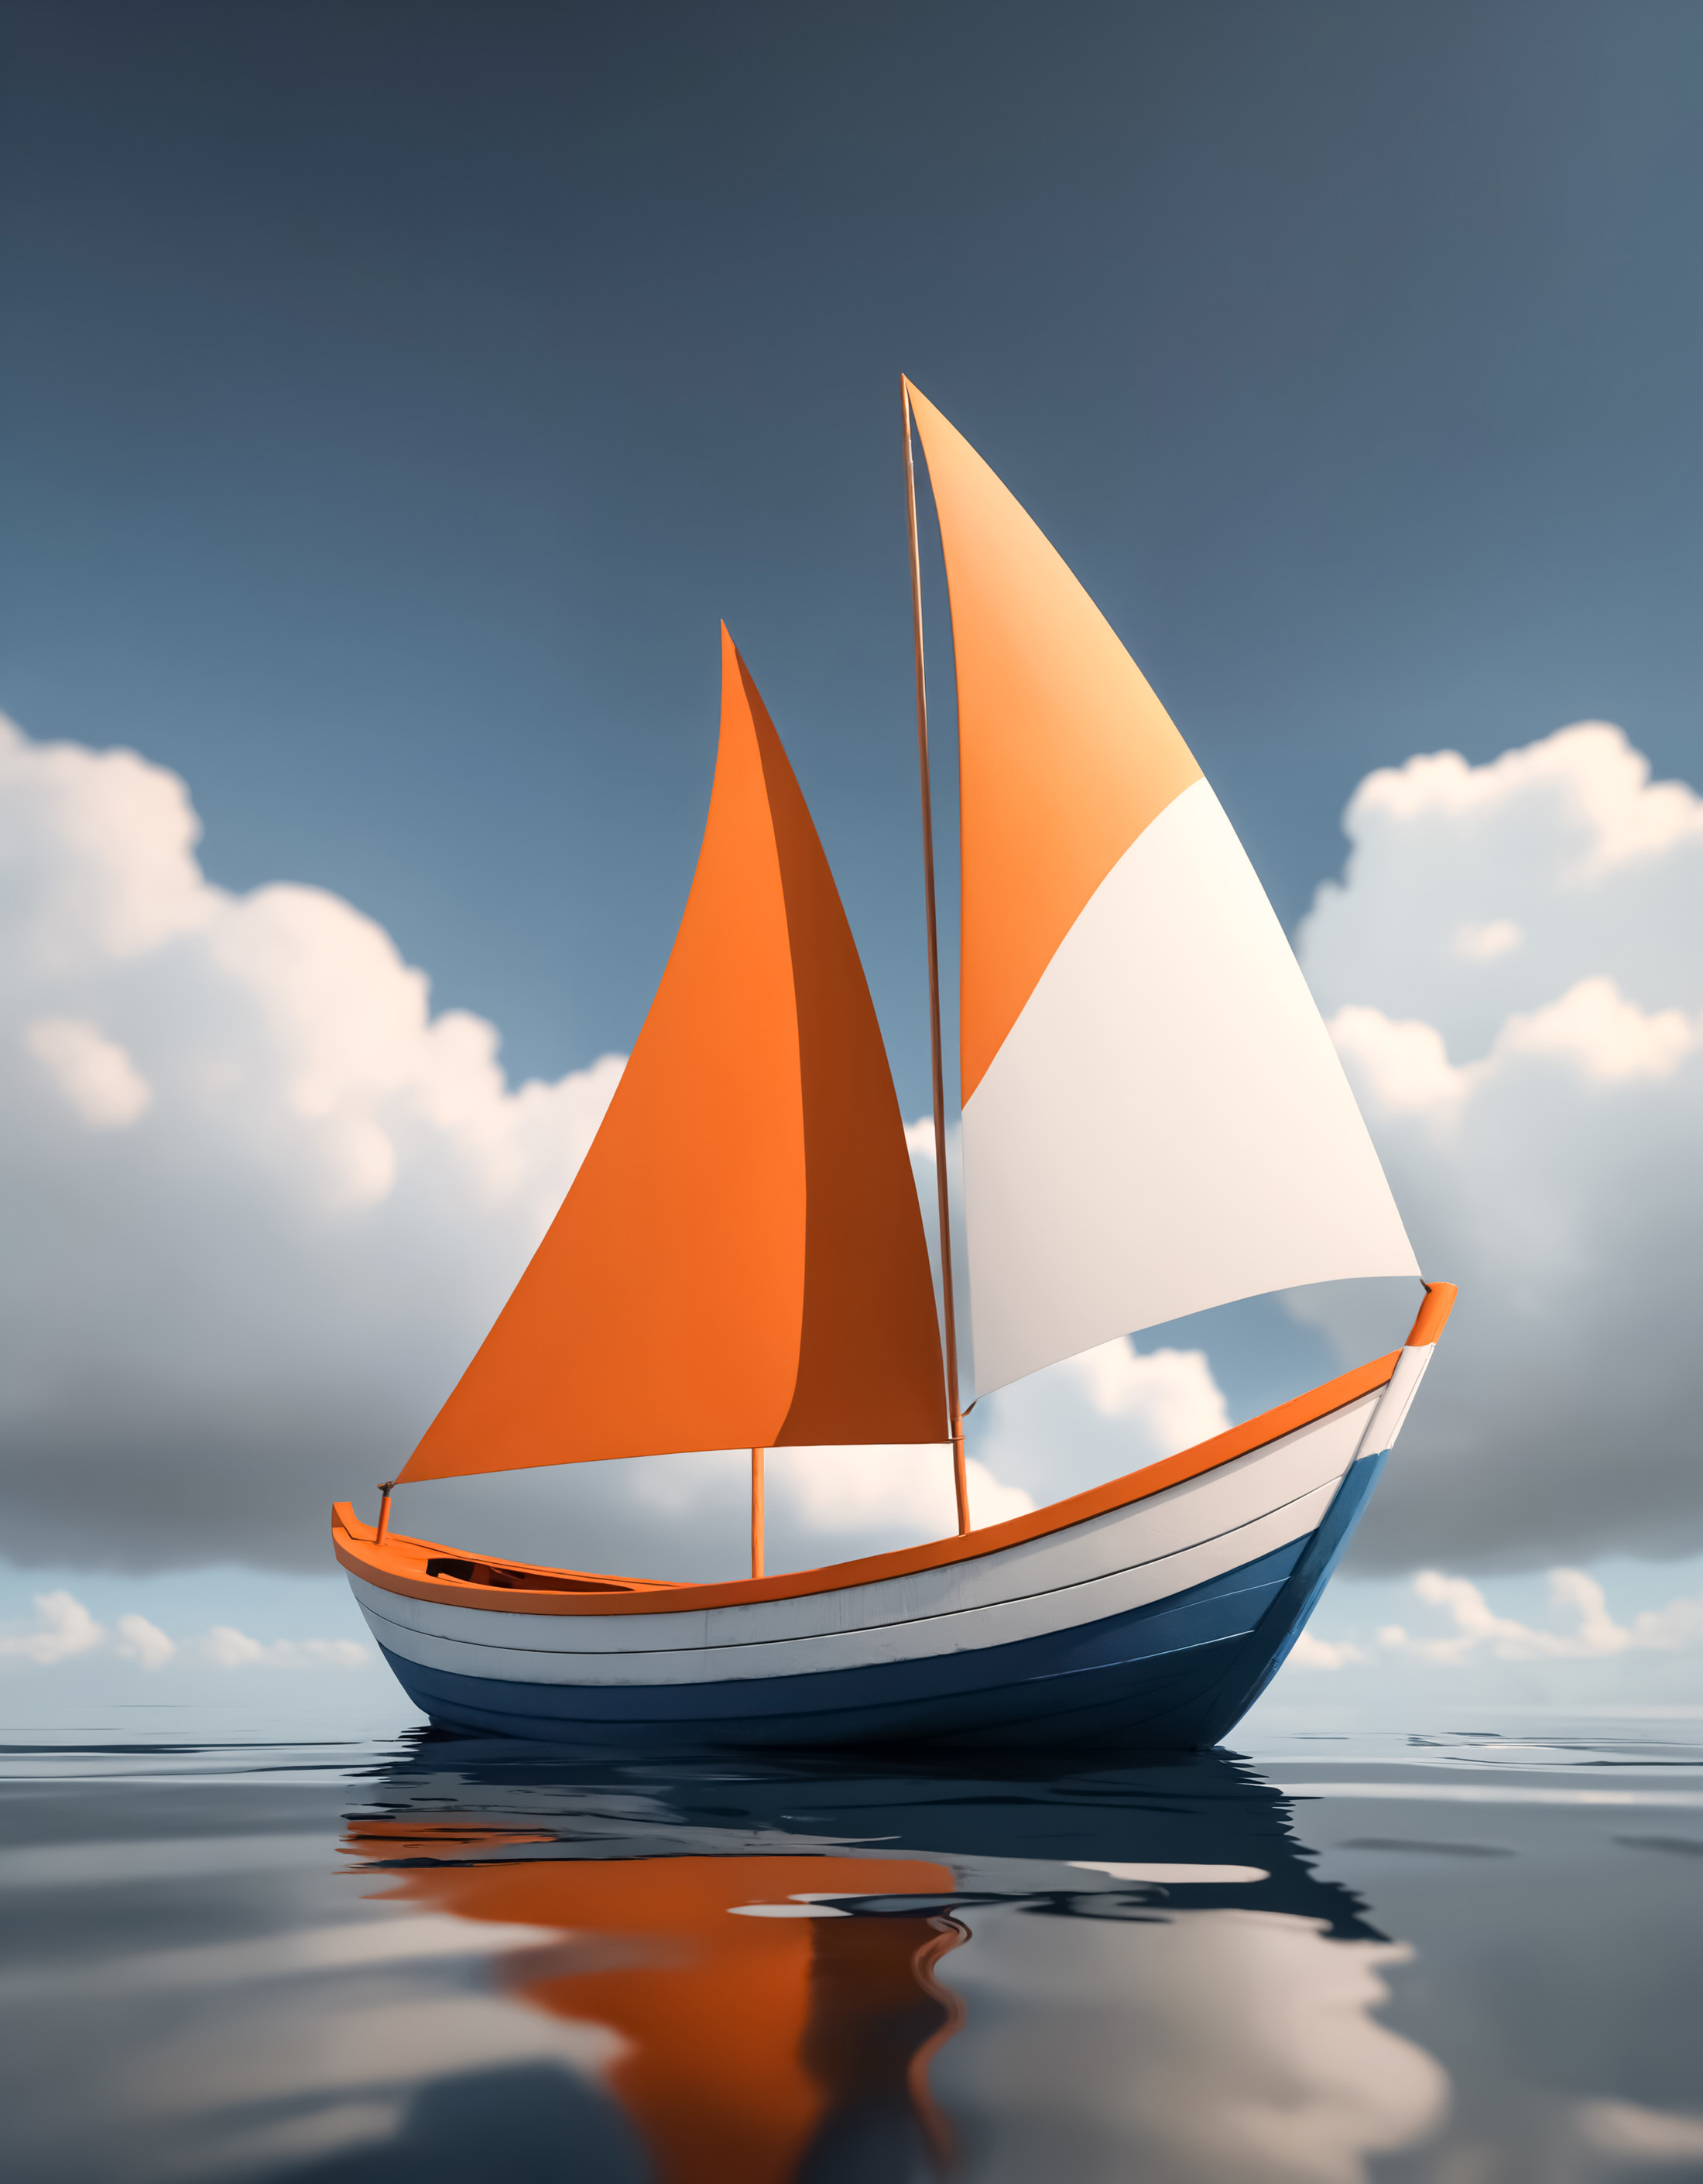 animation about a Boat, in the style of dark white and orange, minimal design, realistic painted still lifes, cartoonish i...